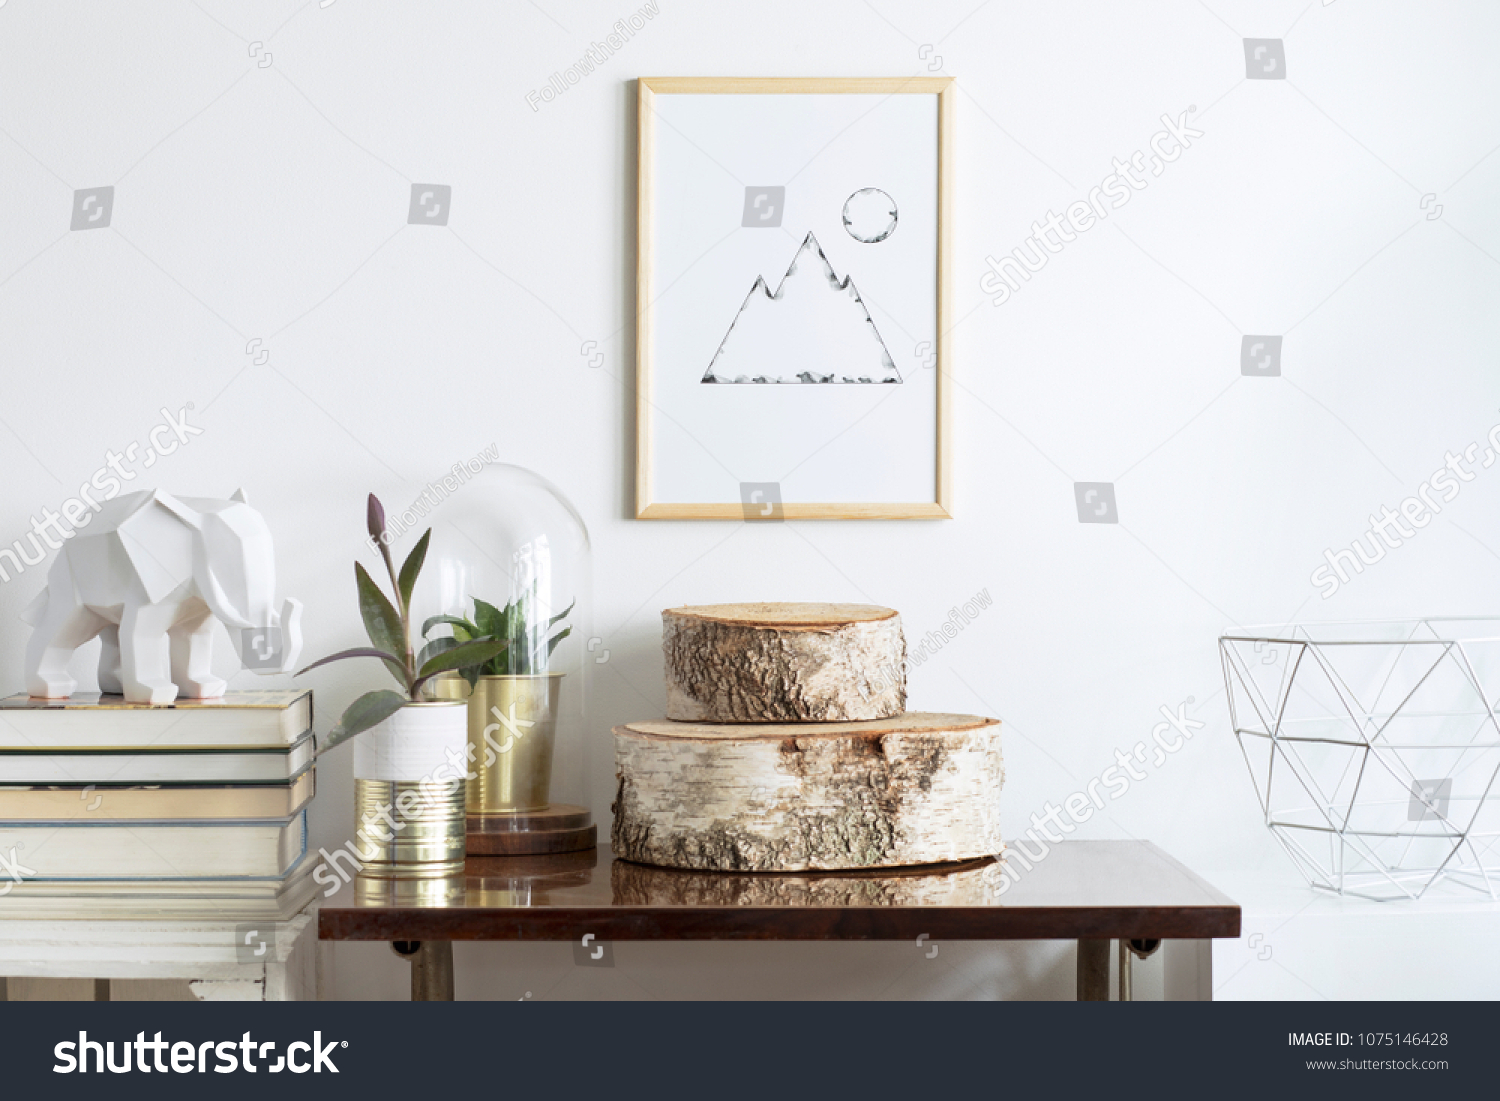 The room interior of vintage space with mock up poster frame, plants, books and white elephant figure. Modern shelfie concept. #1075146428